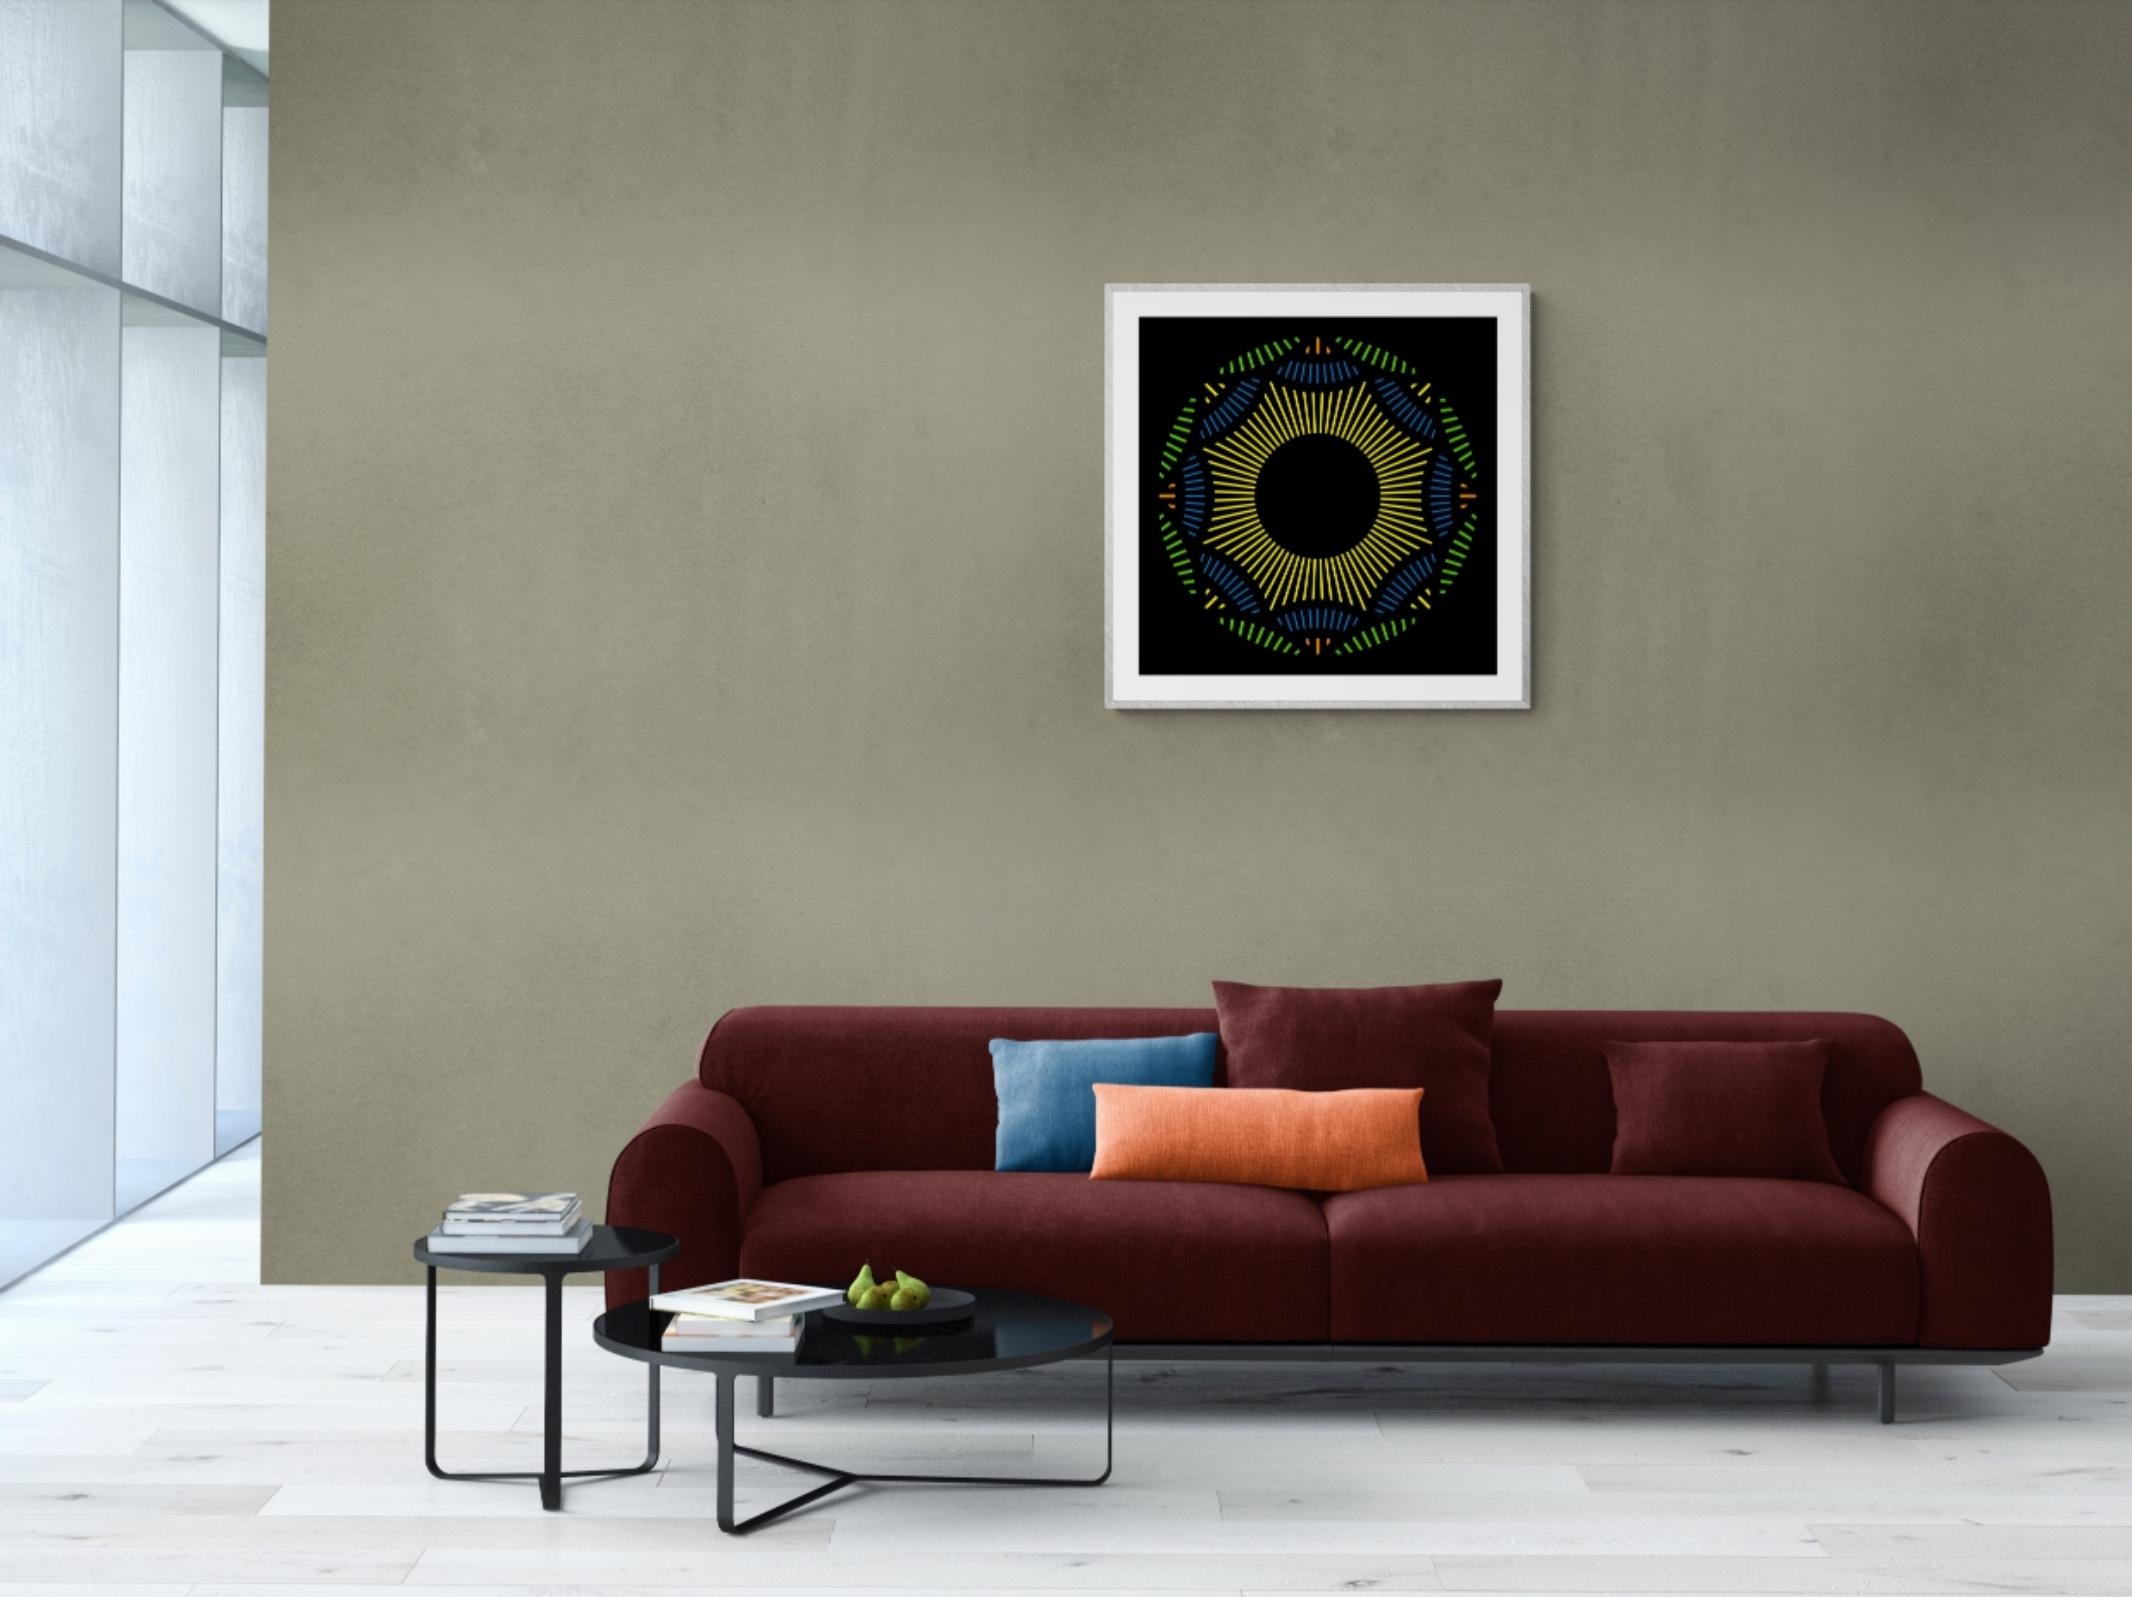 Nebulosa 21 - Black Abstract Print by Julio Campos